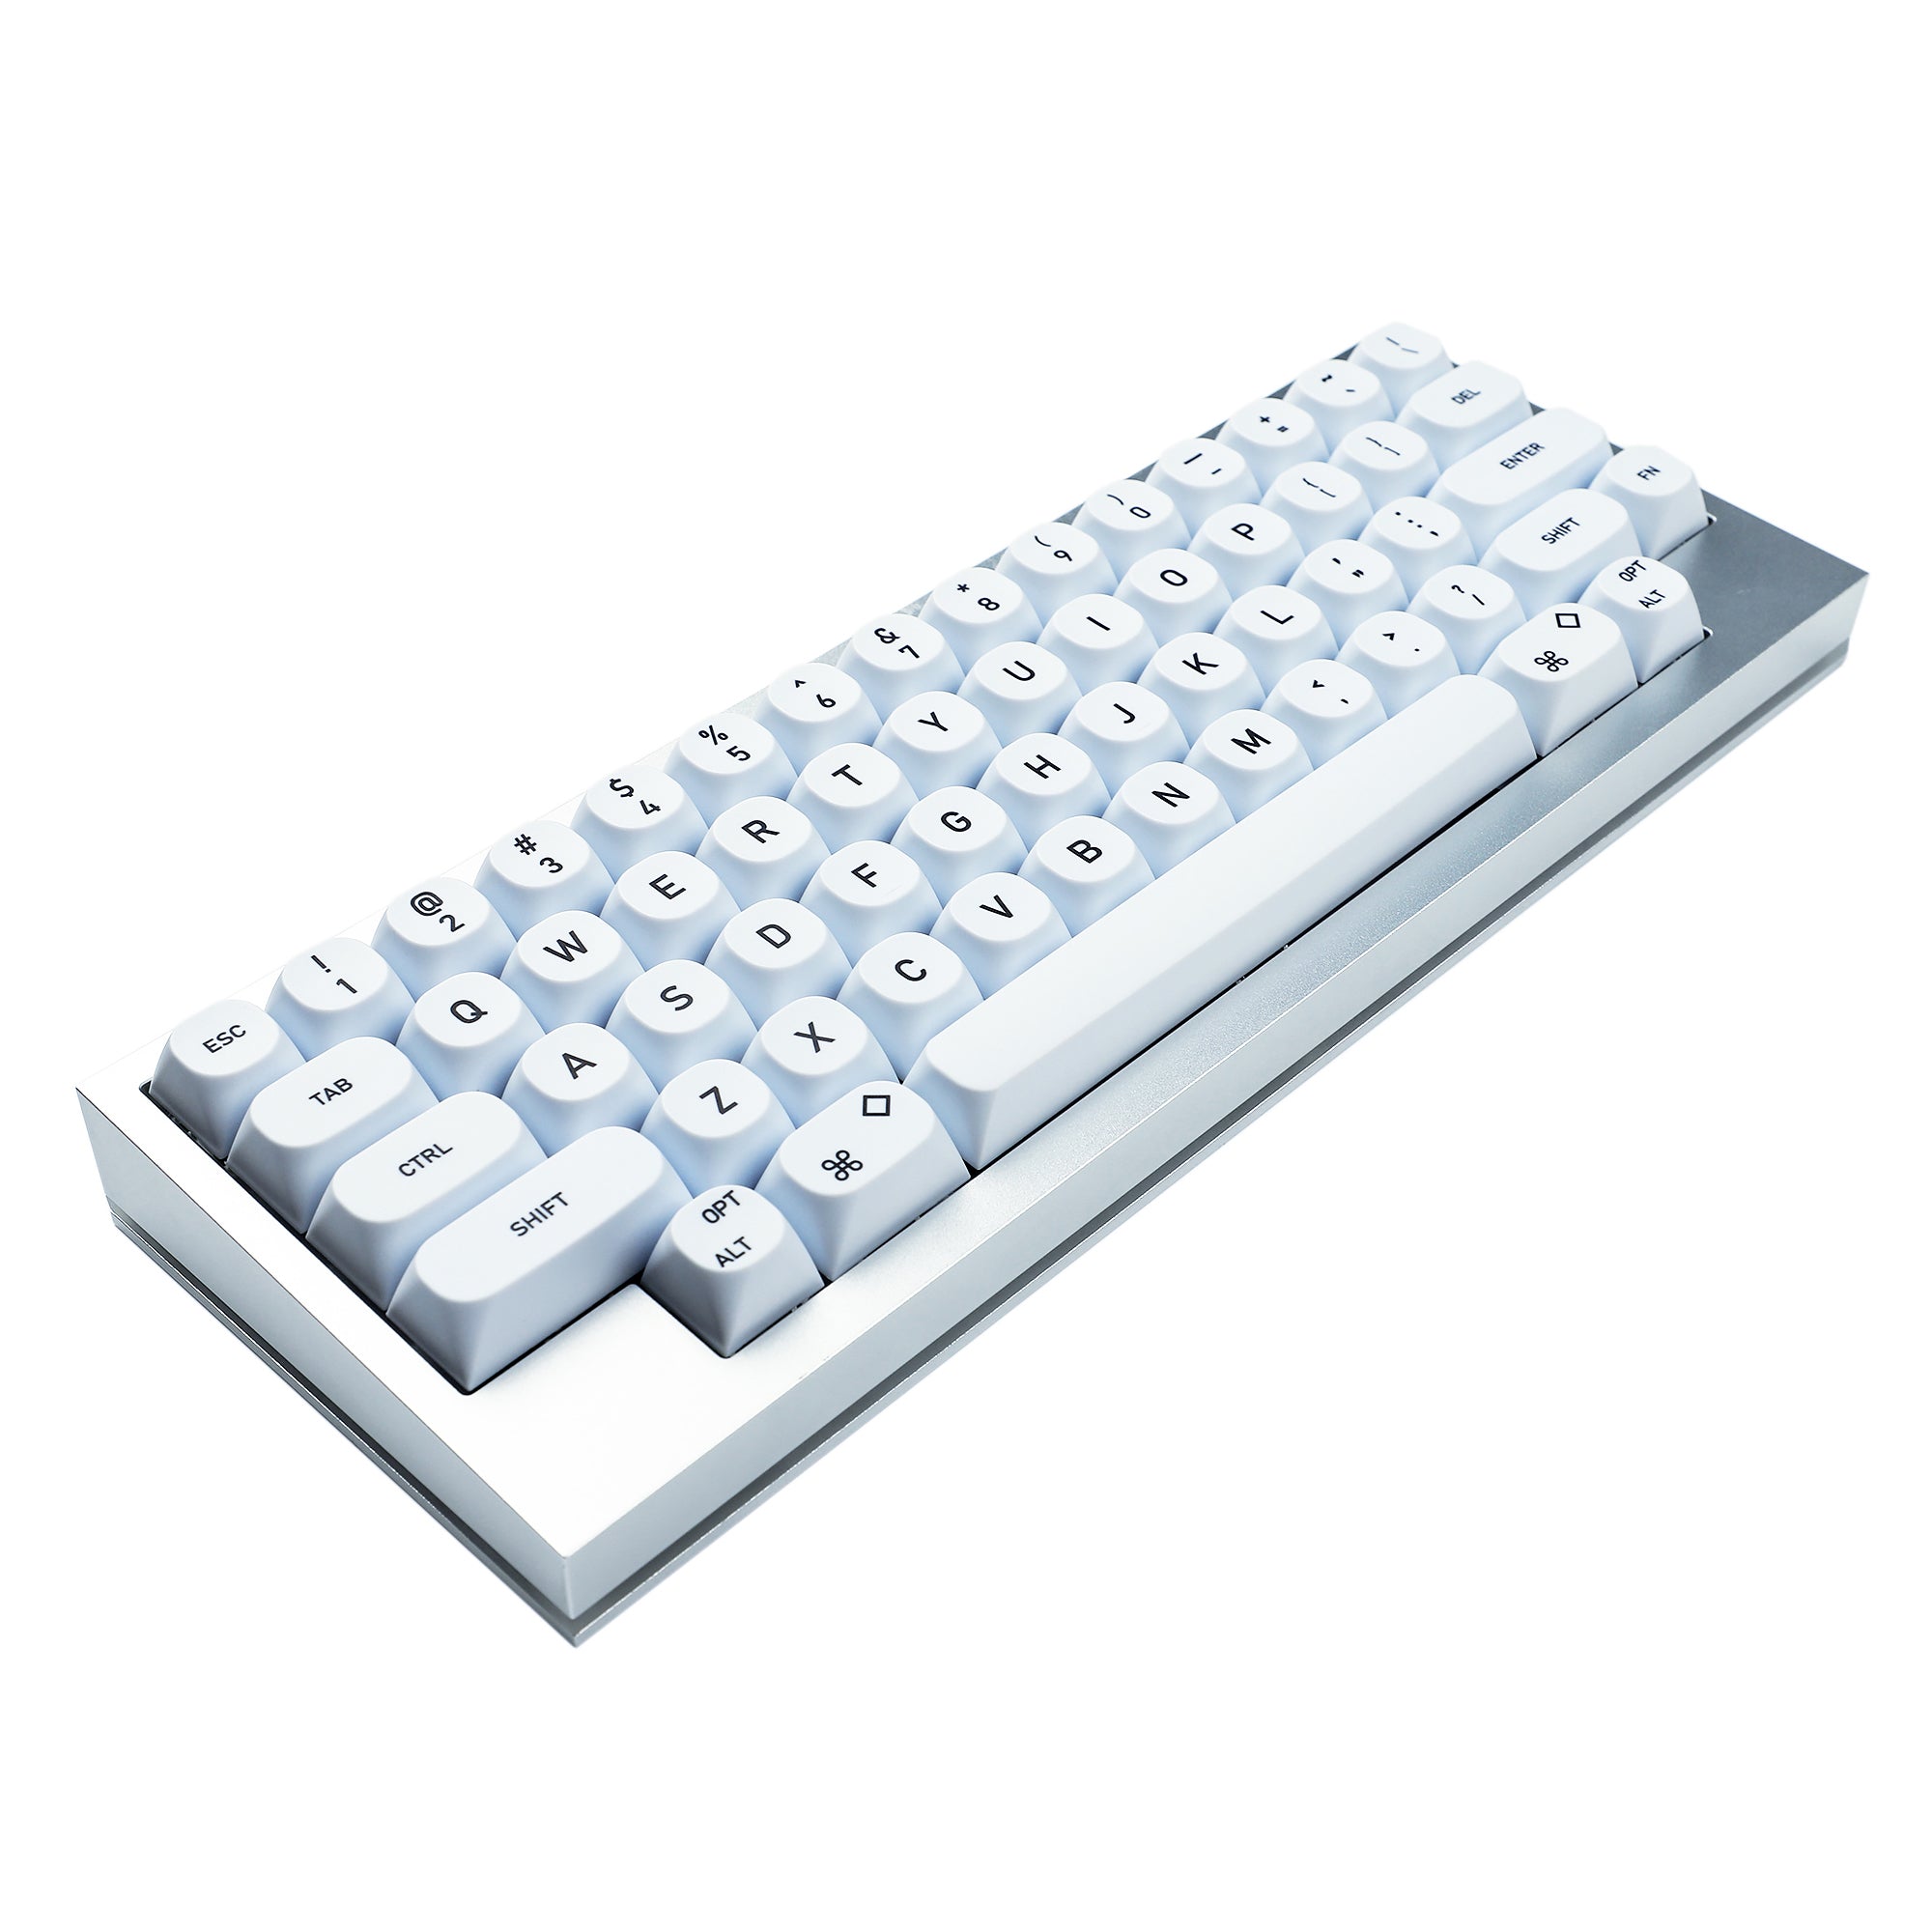 YMD-HHKB Pro Aluminum And Acrylic Layer Kit(QMK Soldering Or